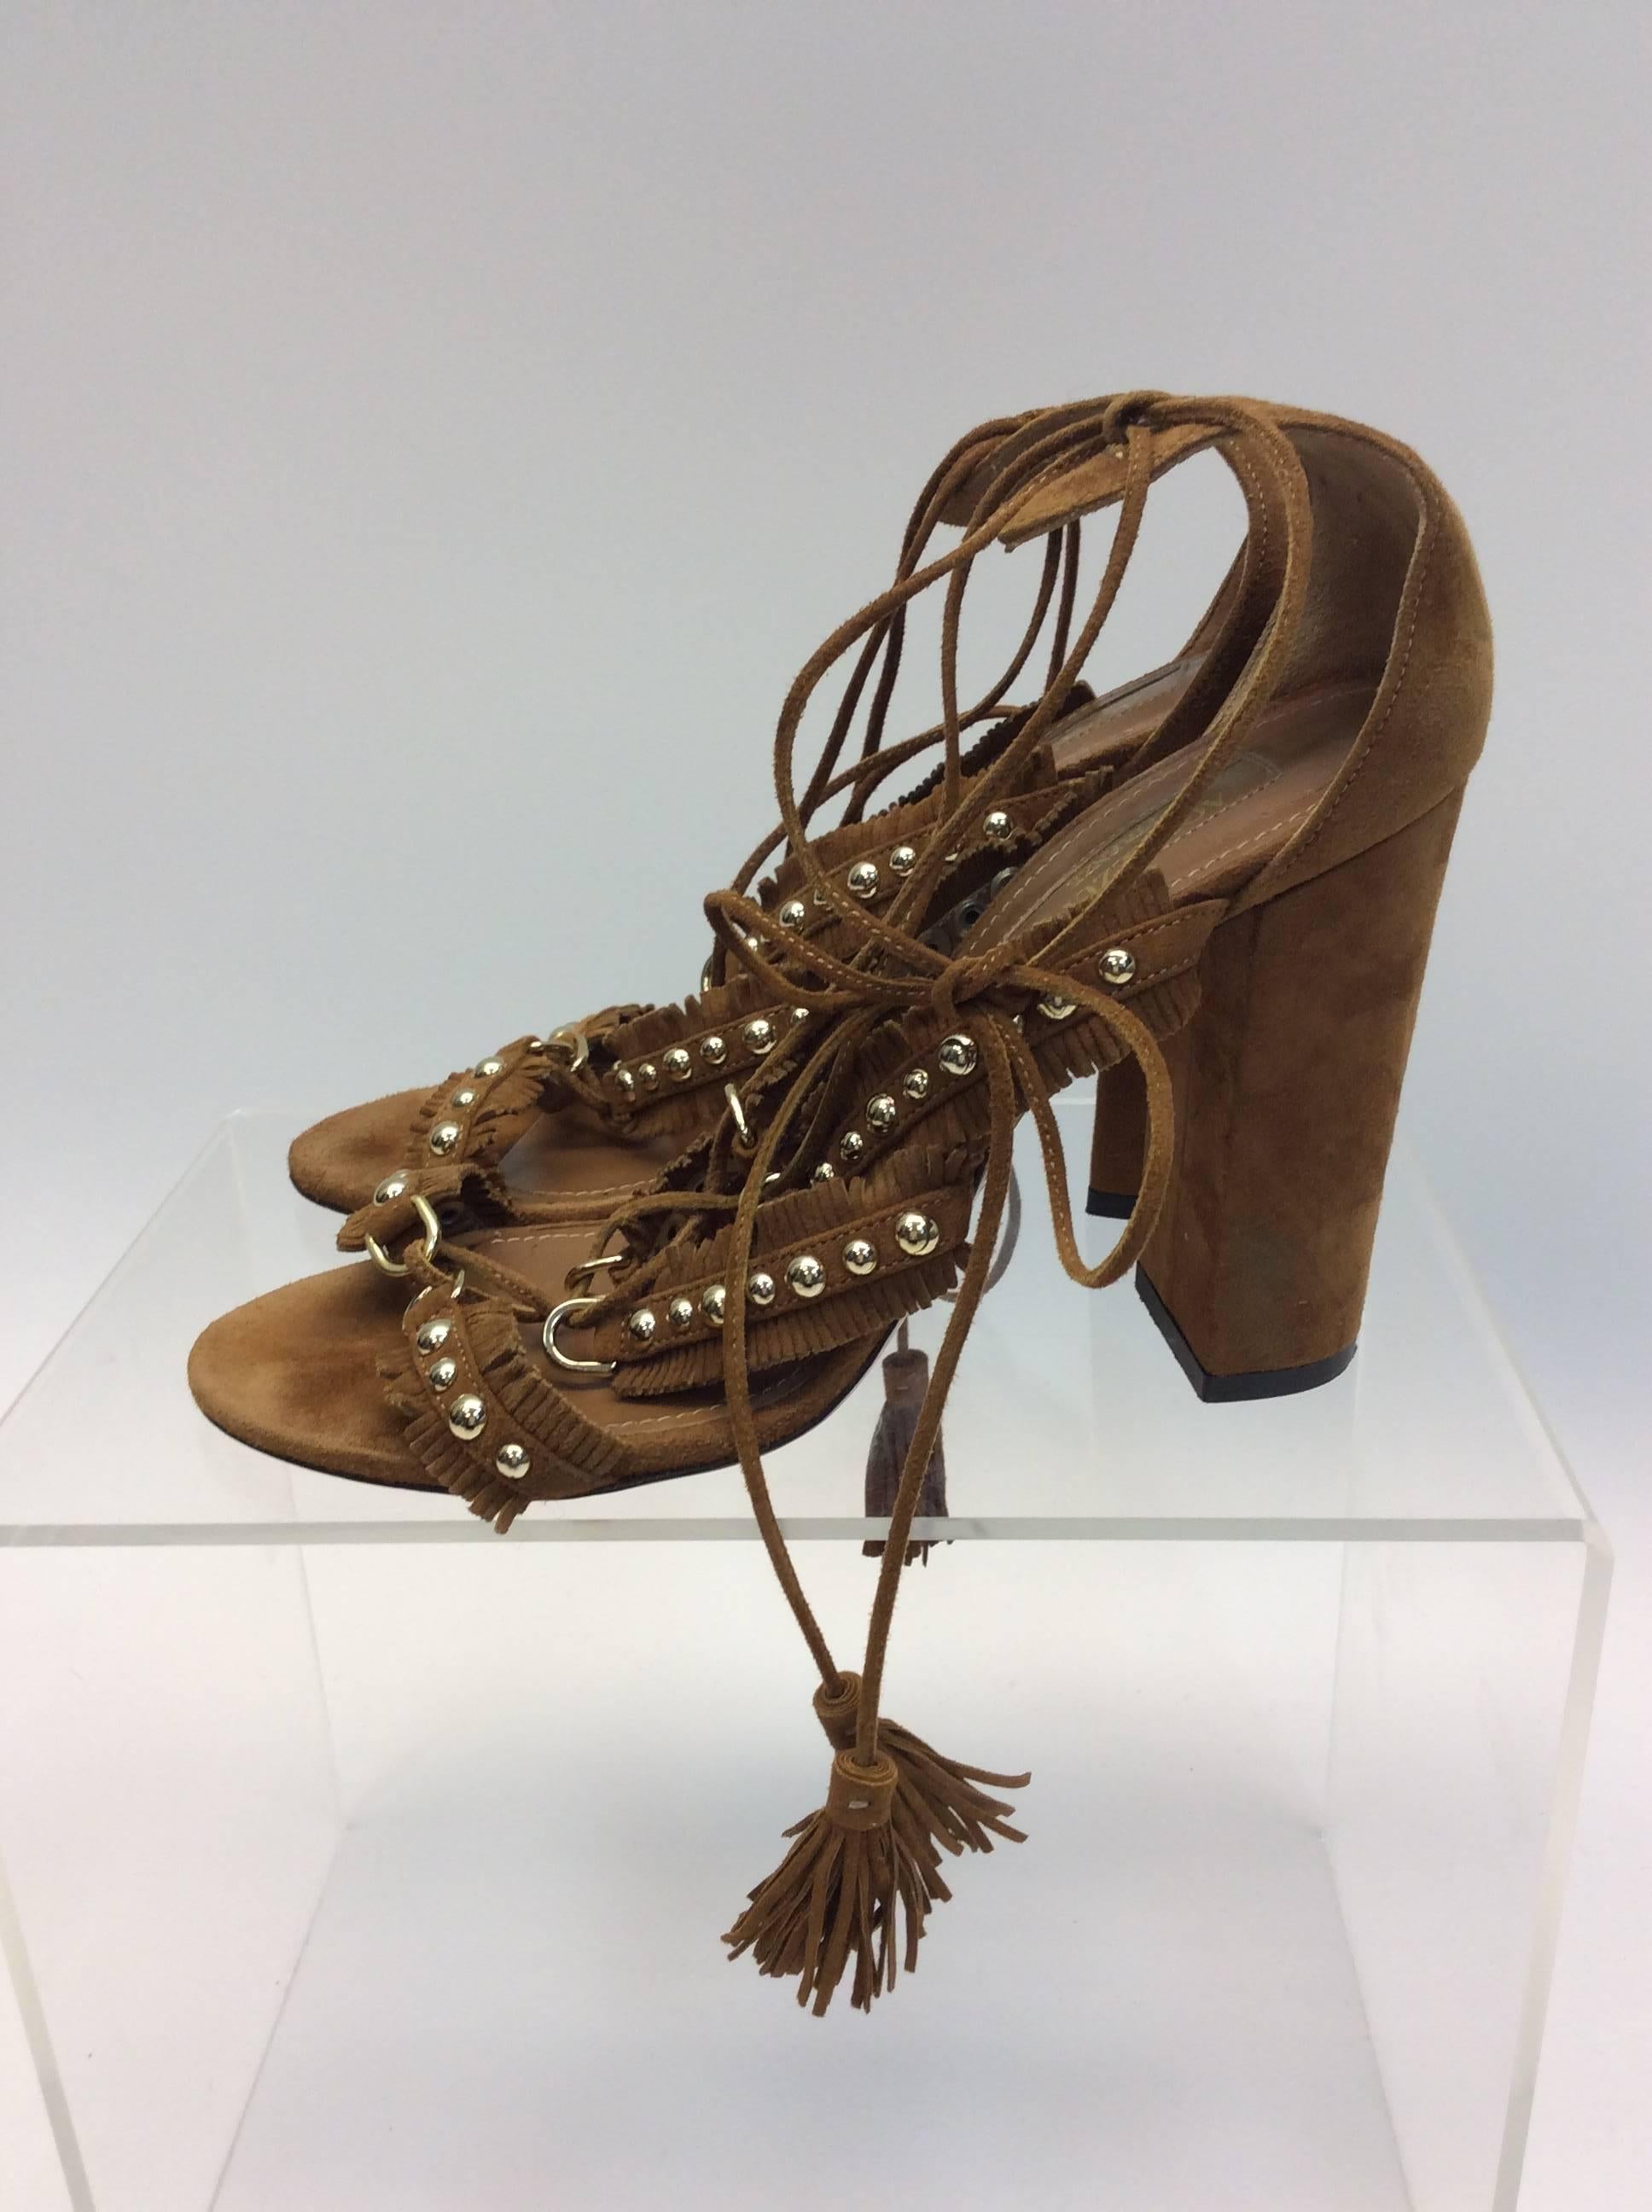 Aquazzura Firenze Tan Suede Studded Sandal
$150
Suede
Made in Italy 
Size 36.5
4